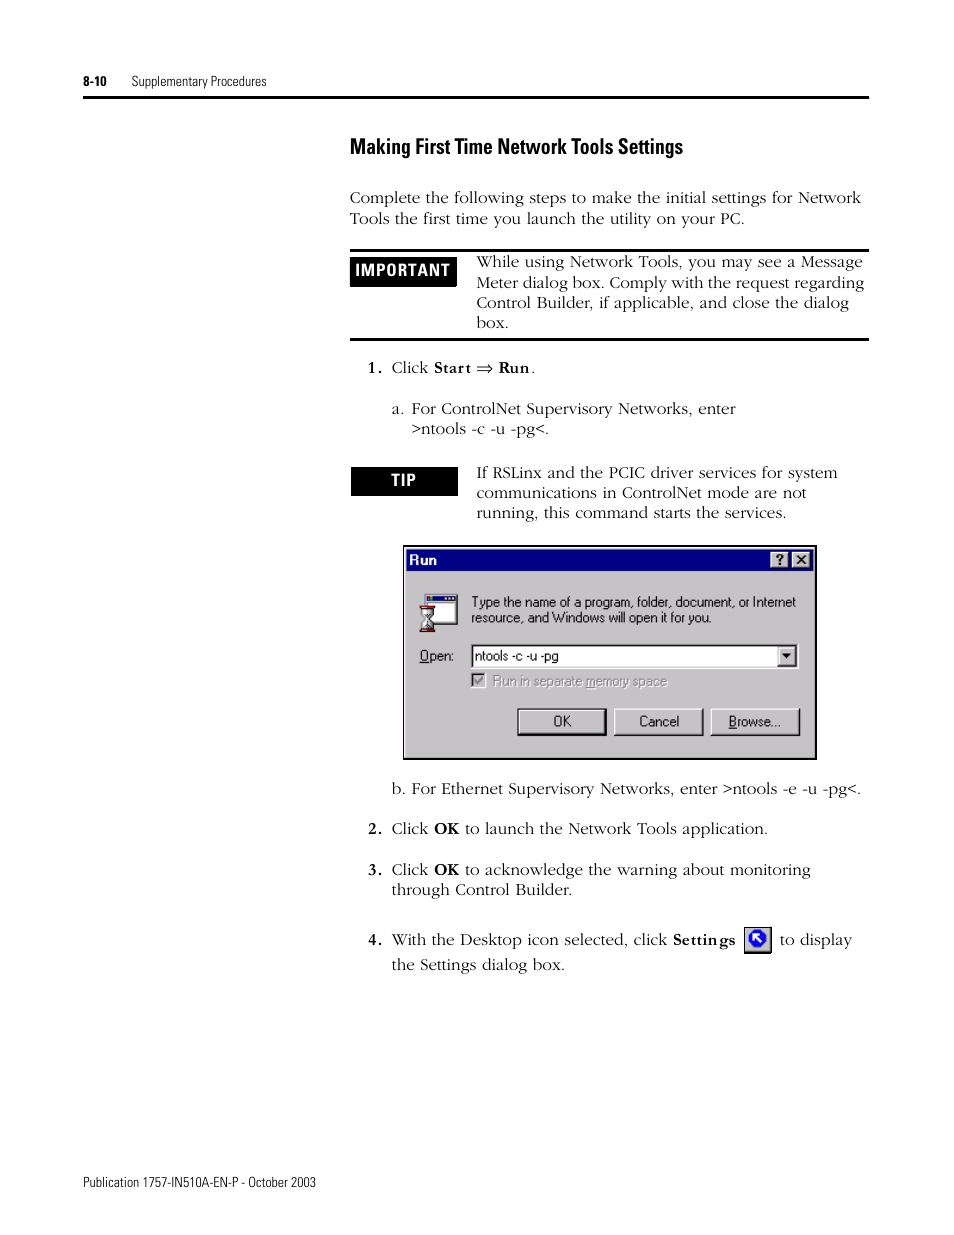 Making first time network tools settings, Making first time network tools settings -10, Refer | Rockwell Automation 1757-SWKIT5100 ProcessLogix R510.0 Installation and Upgrade Guide User Manual | Page 212 / 271